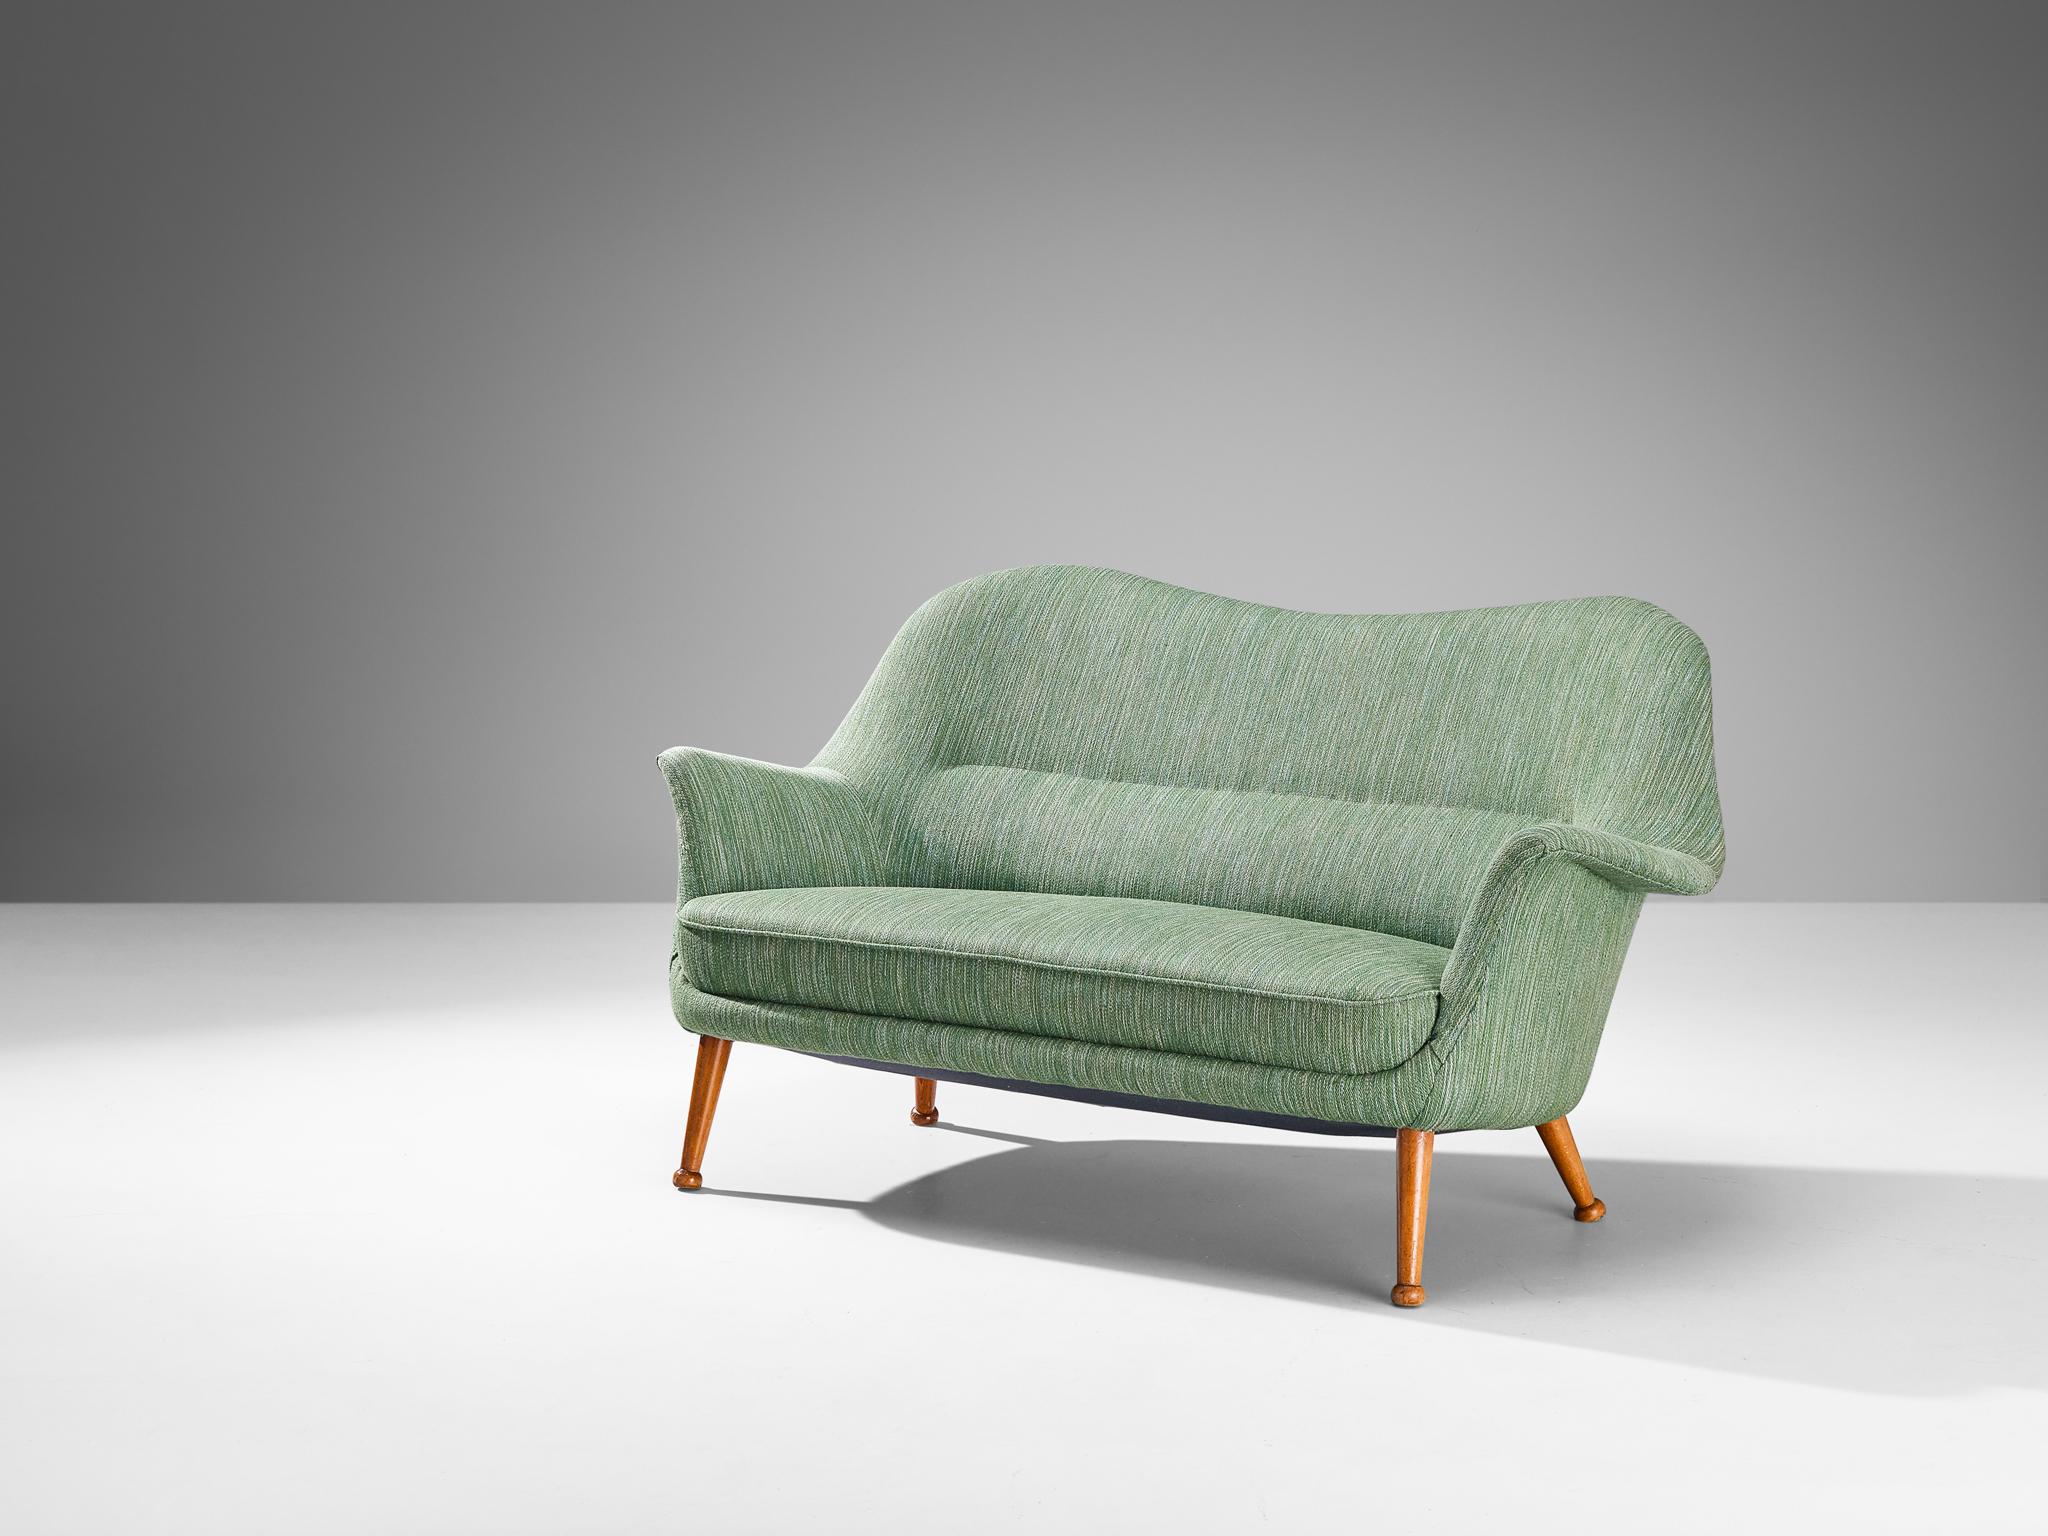 Arne Norell for Westbergs Möbler, 'Divina' sofa, fabric, stained beech, Sweden, late 1950s

This 'Divina' sofa is designed by Swedish designer Arne Norell. The seat is characterized by a shell construction with curvaceous lines. The back develops